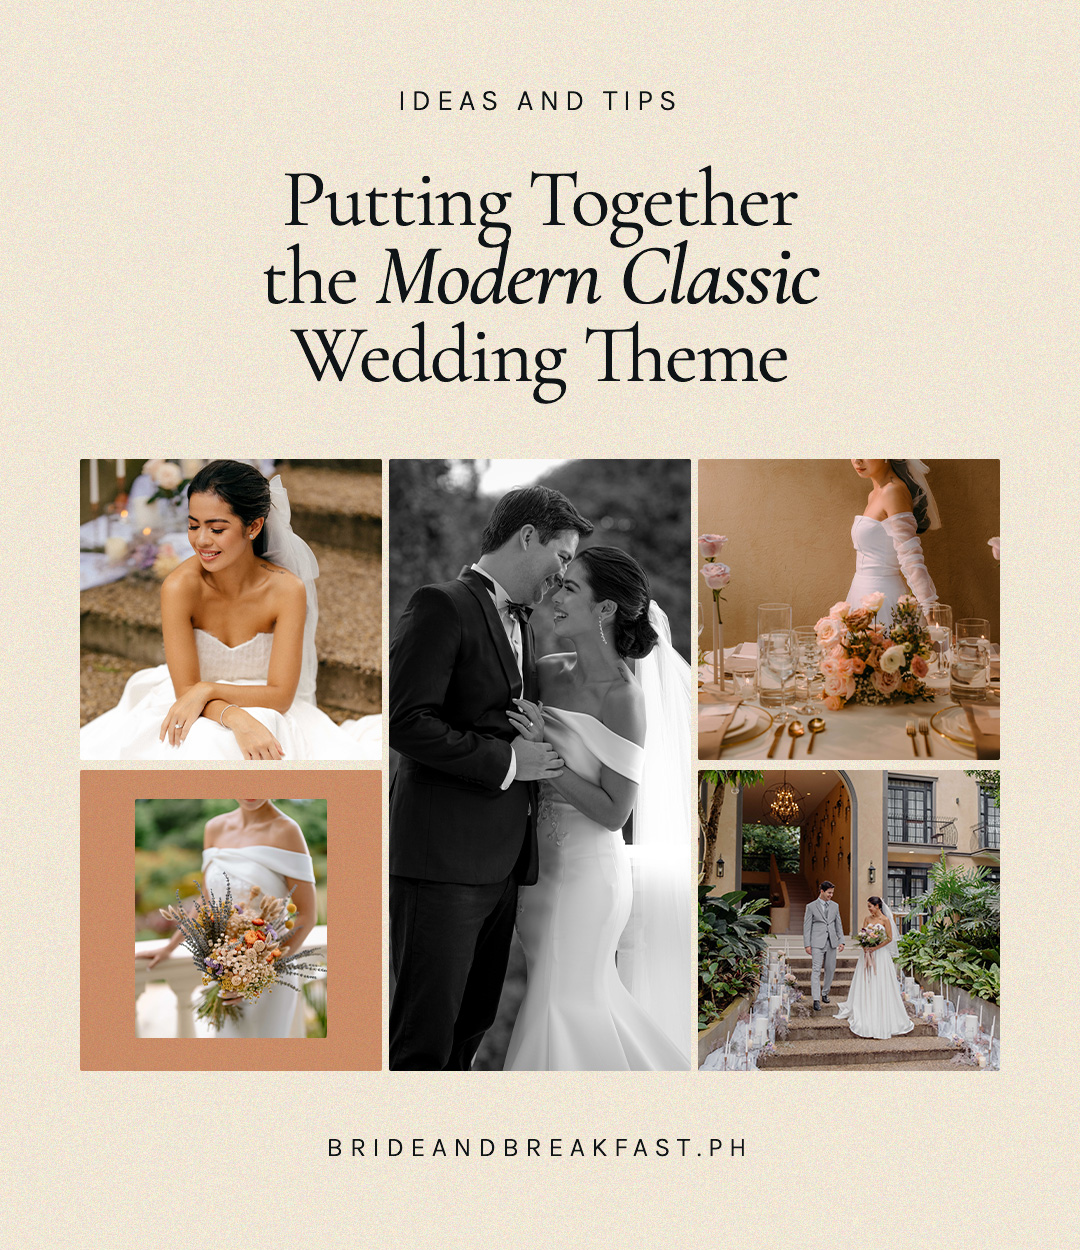 Putting Together the Modern Classic Wedding Theme